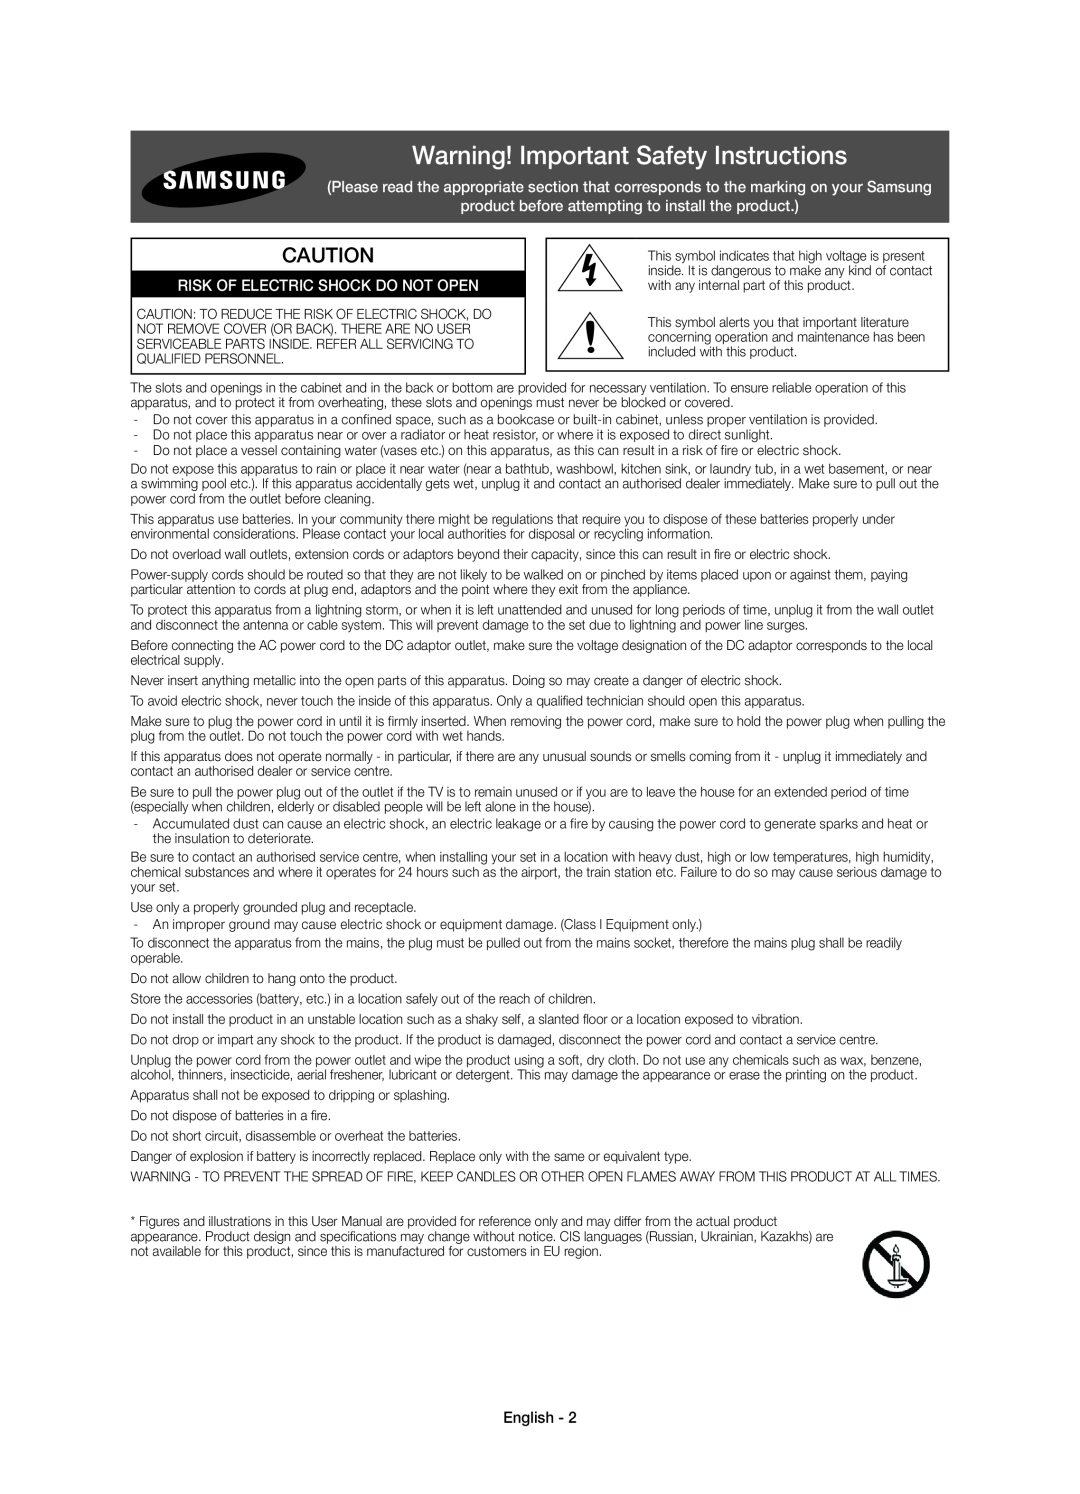 Samsung UE40H5303AWXTK manual Warning! Important Safety Instructions, product before attempting to install the product 